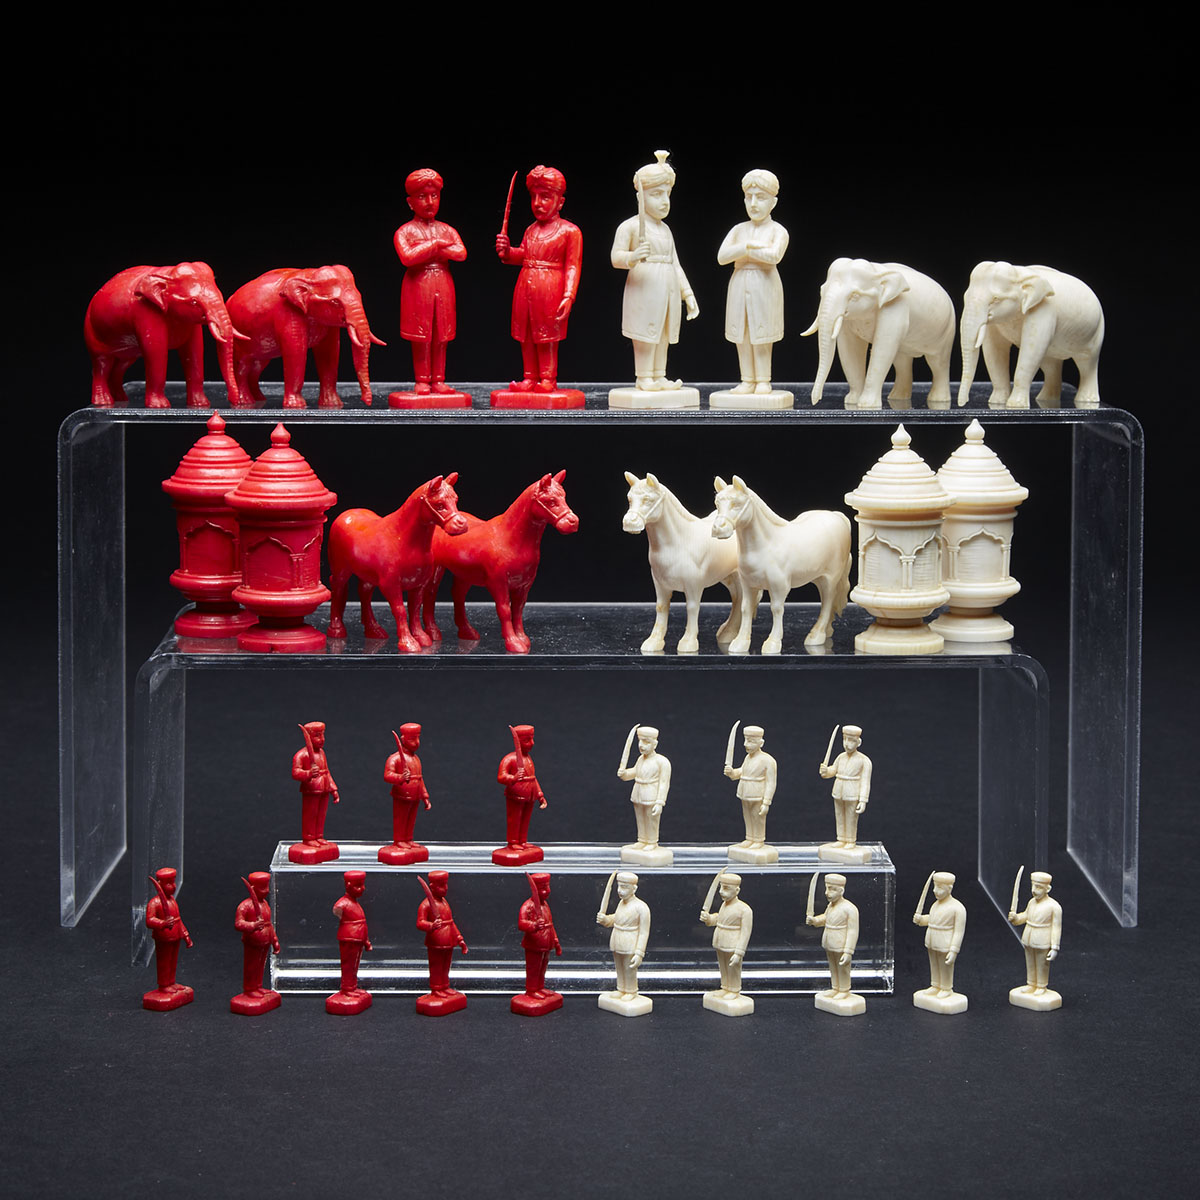 Indian Carved Ivory Figural and Animal Form Chess Set, 19th century